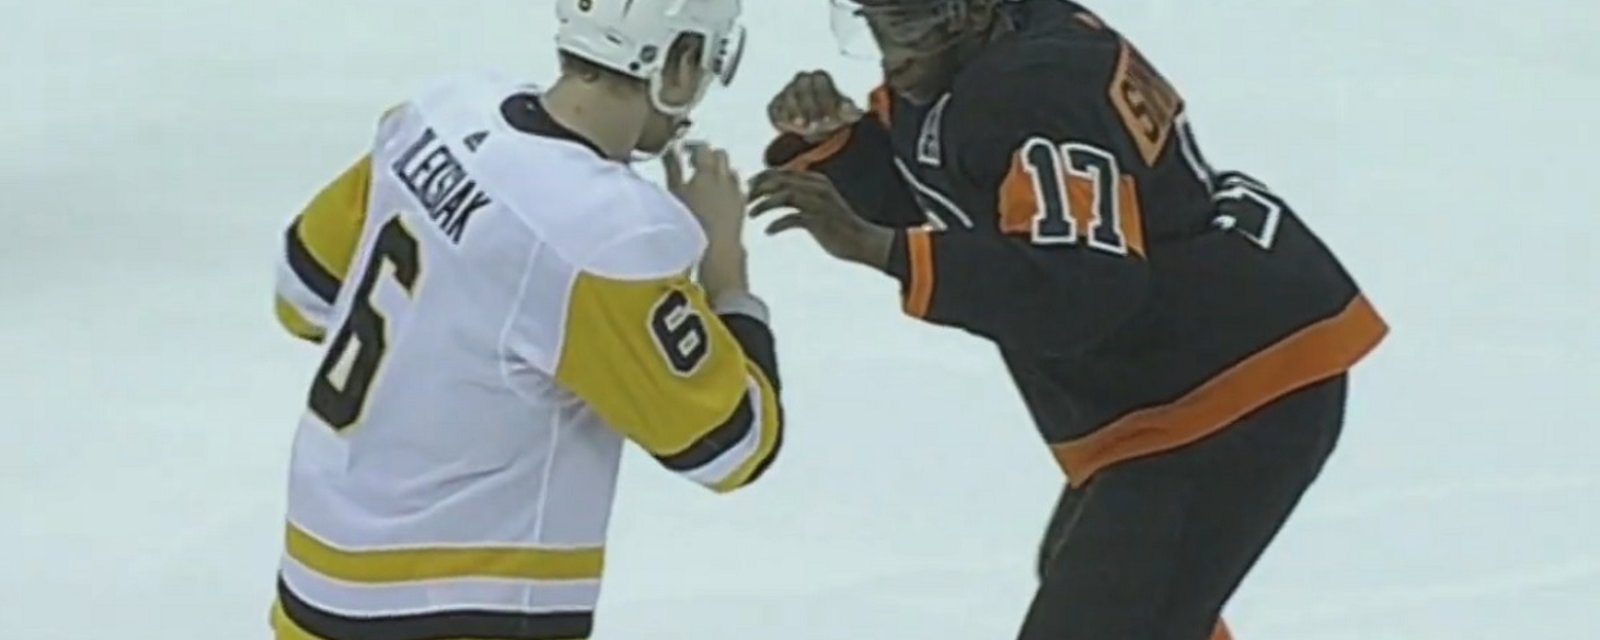 Simmonds and Oleksiak go to war in epic back and forth fight.